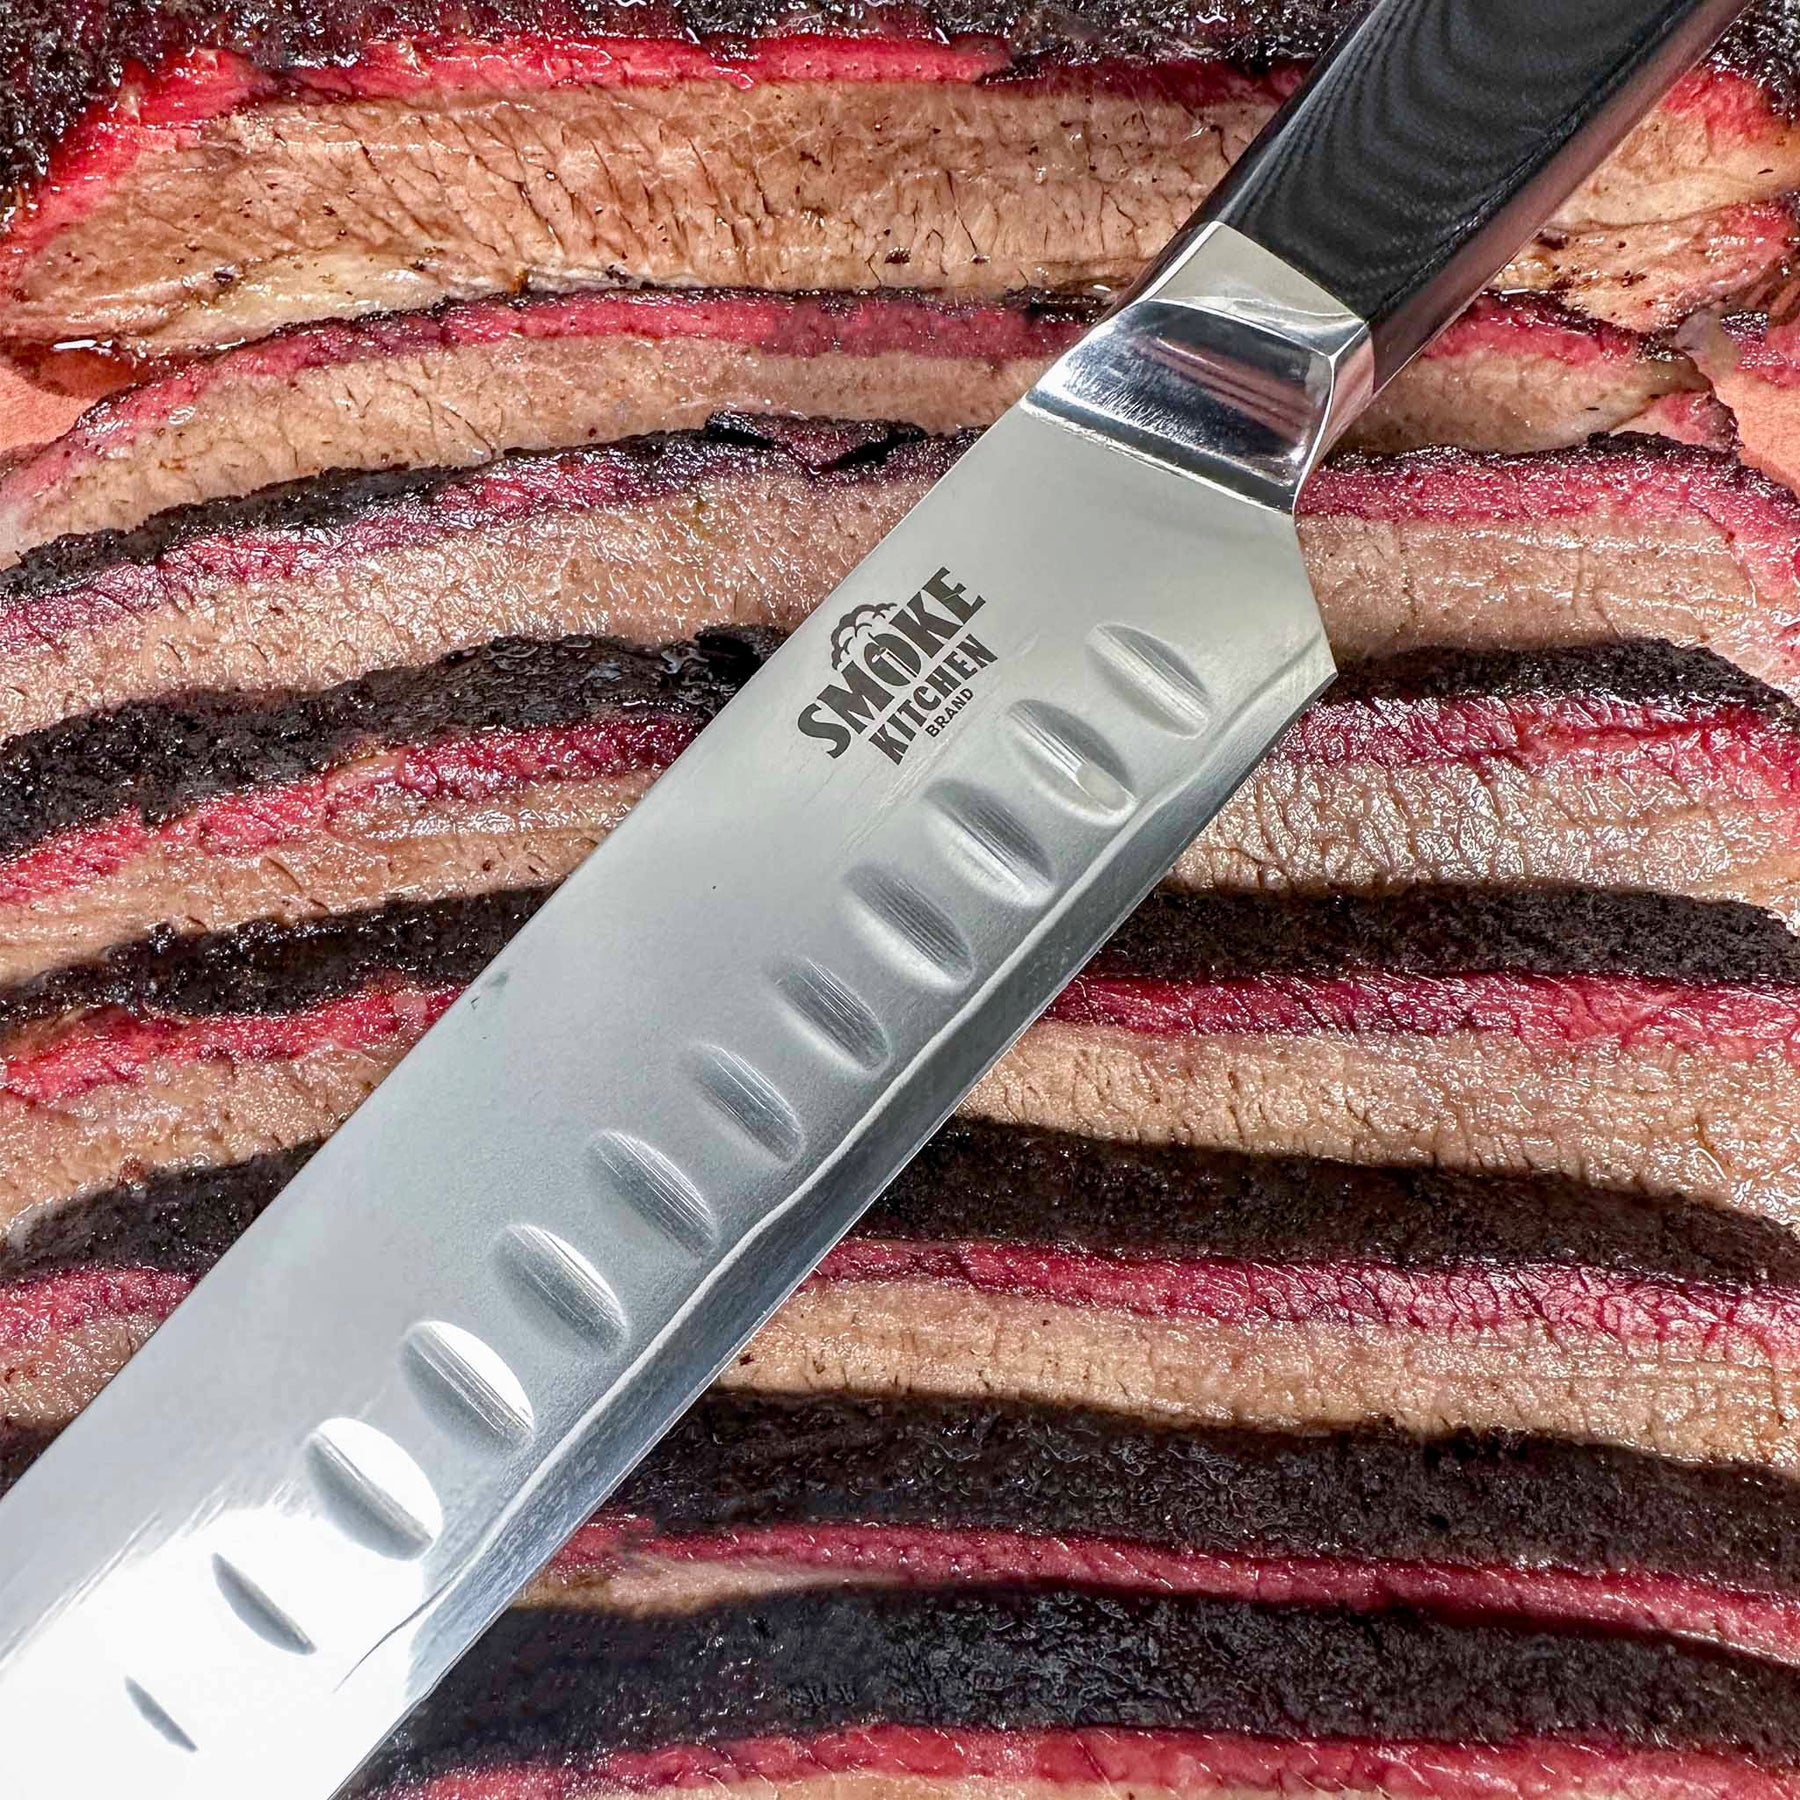 12 Meat Slicing Knife – Smoked BBQ Source